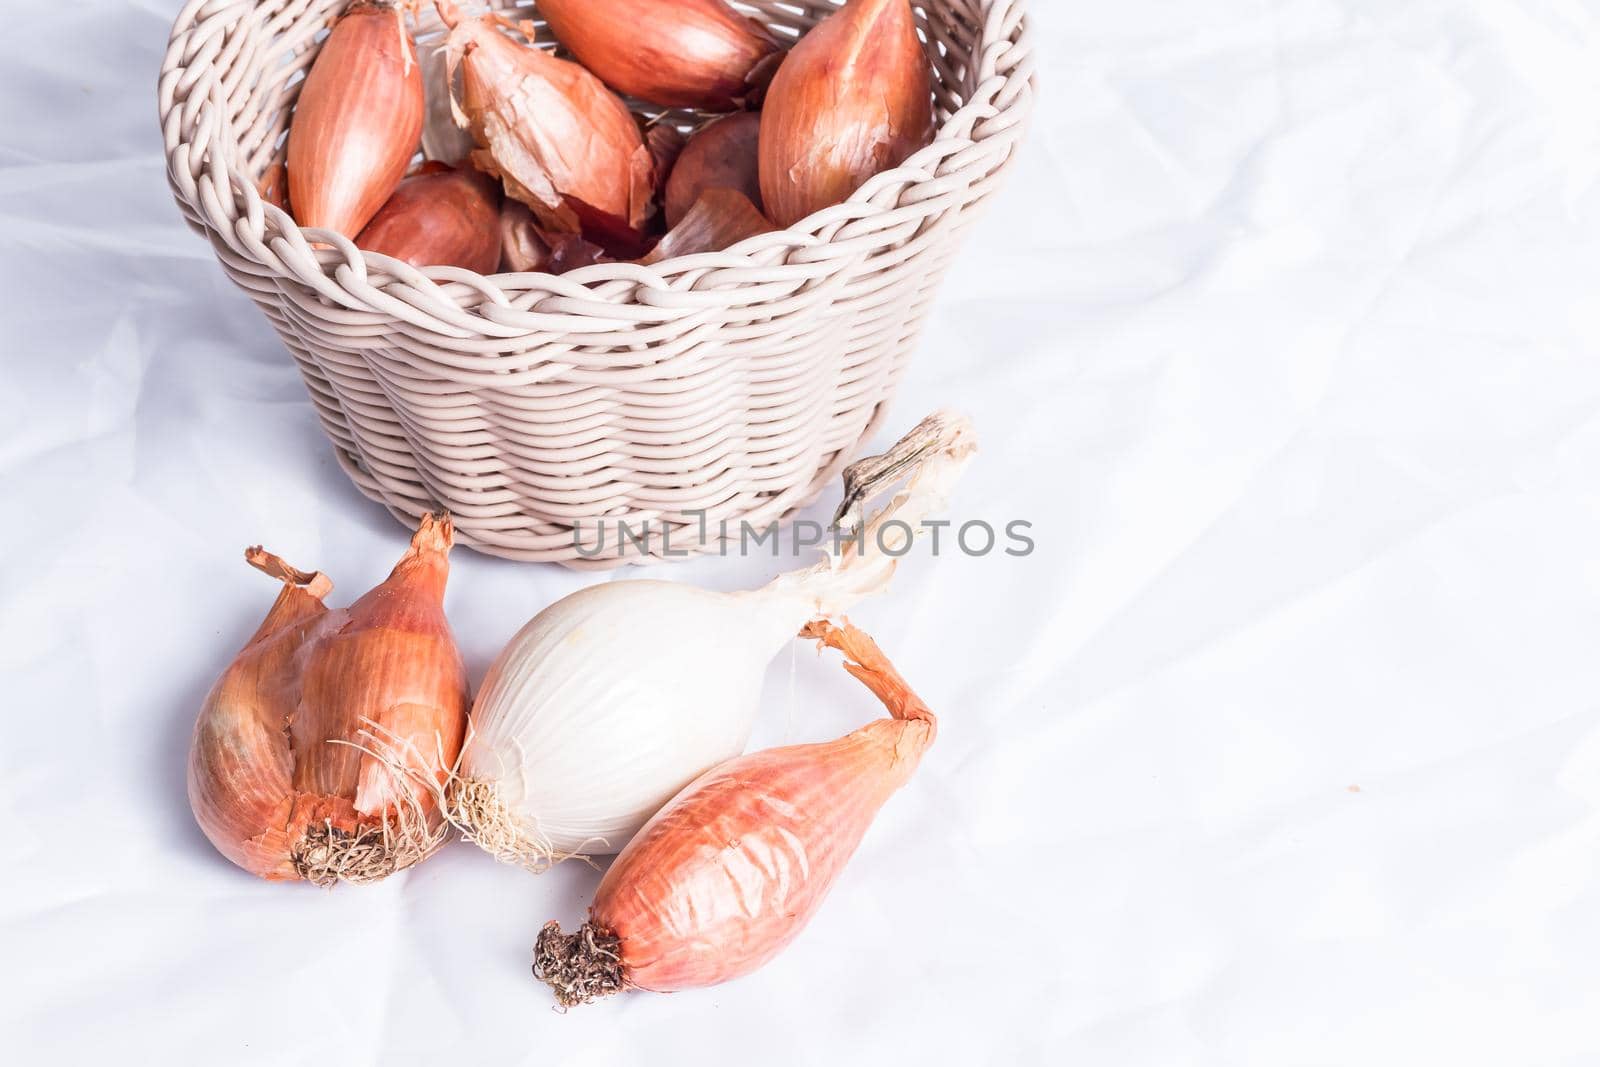 shallot in a wicker basket on a white background